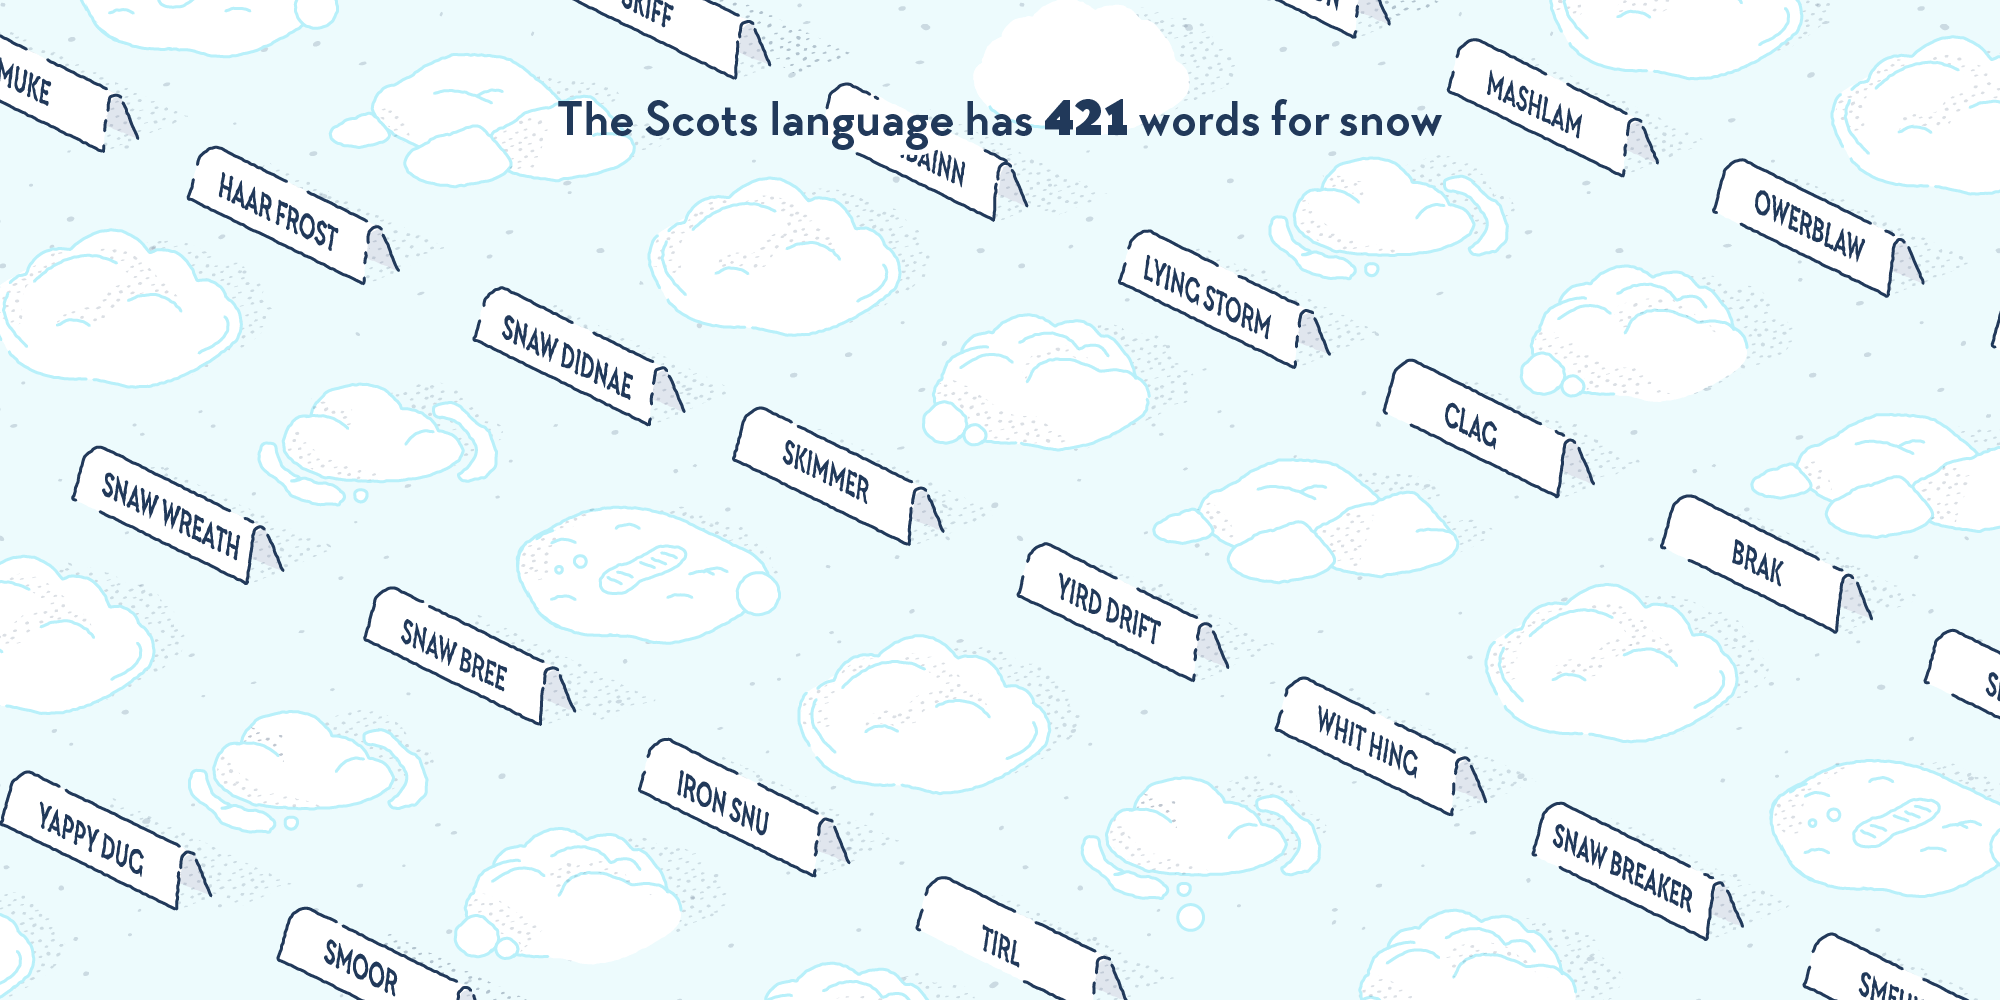 A myriad of little piles of snow, each with a label on which can be read some Scots words for snow.